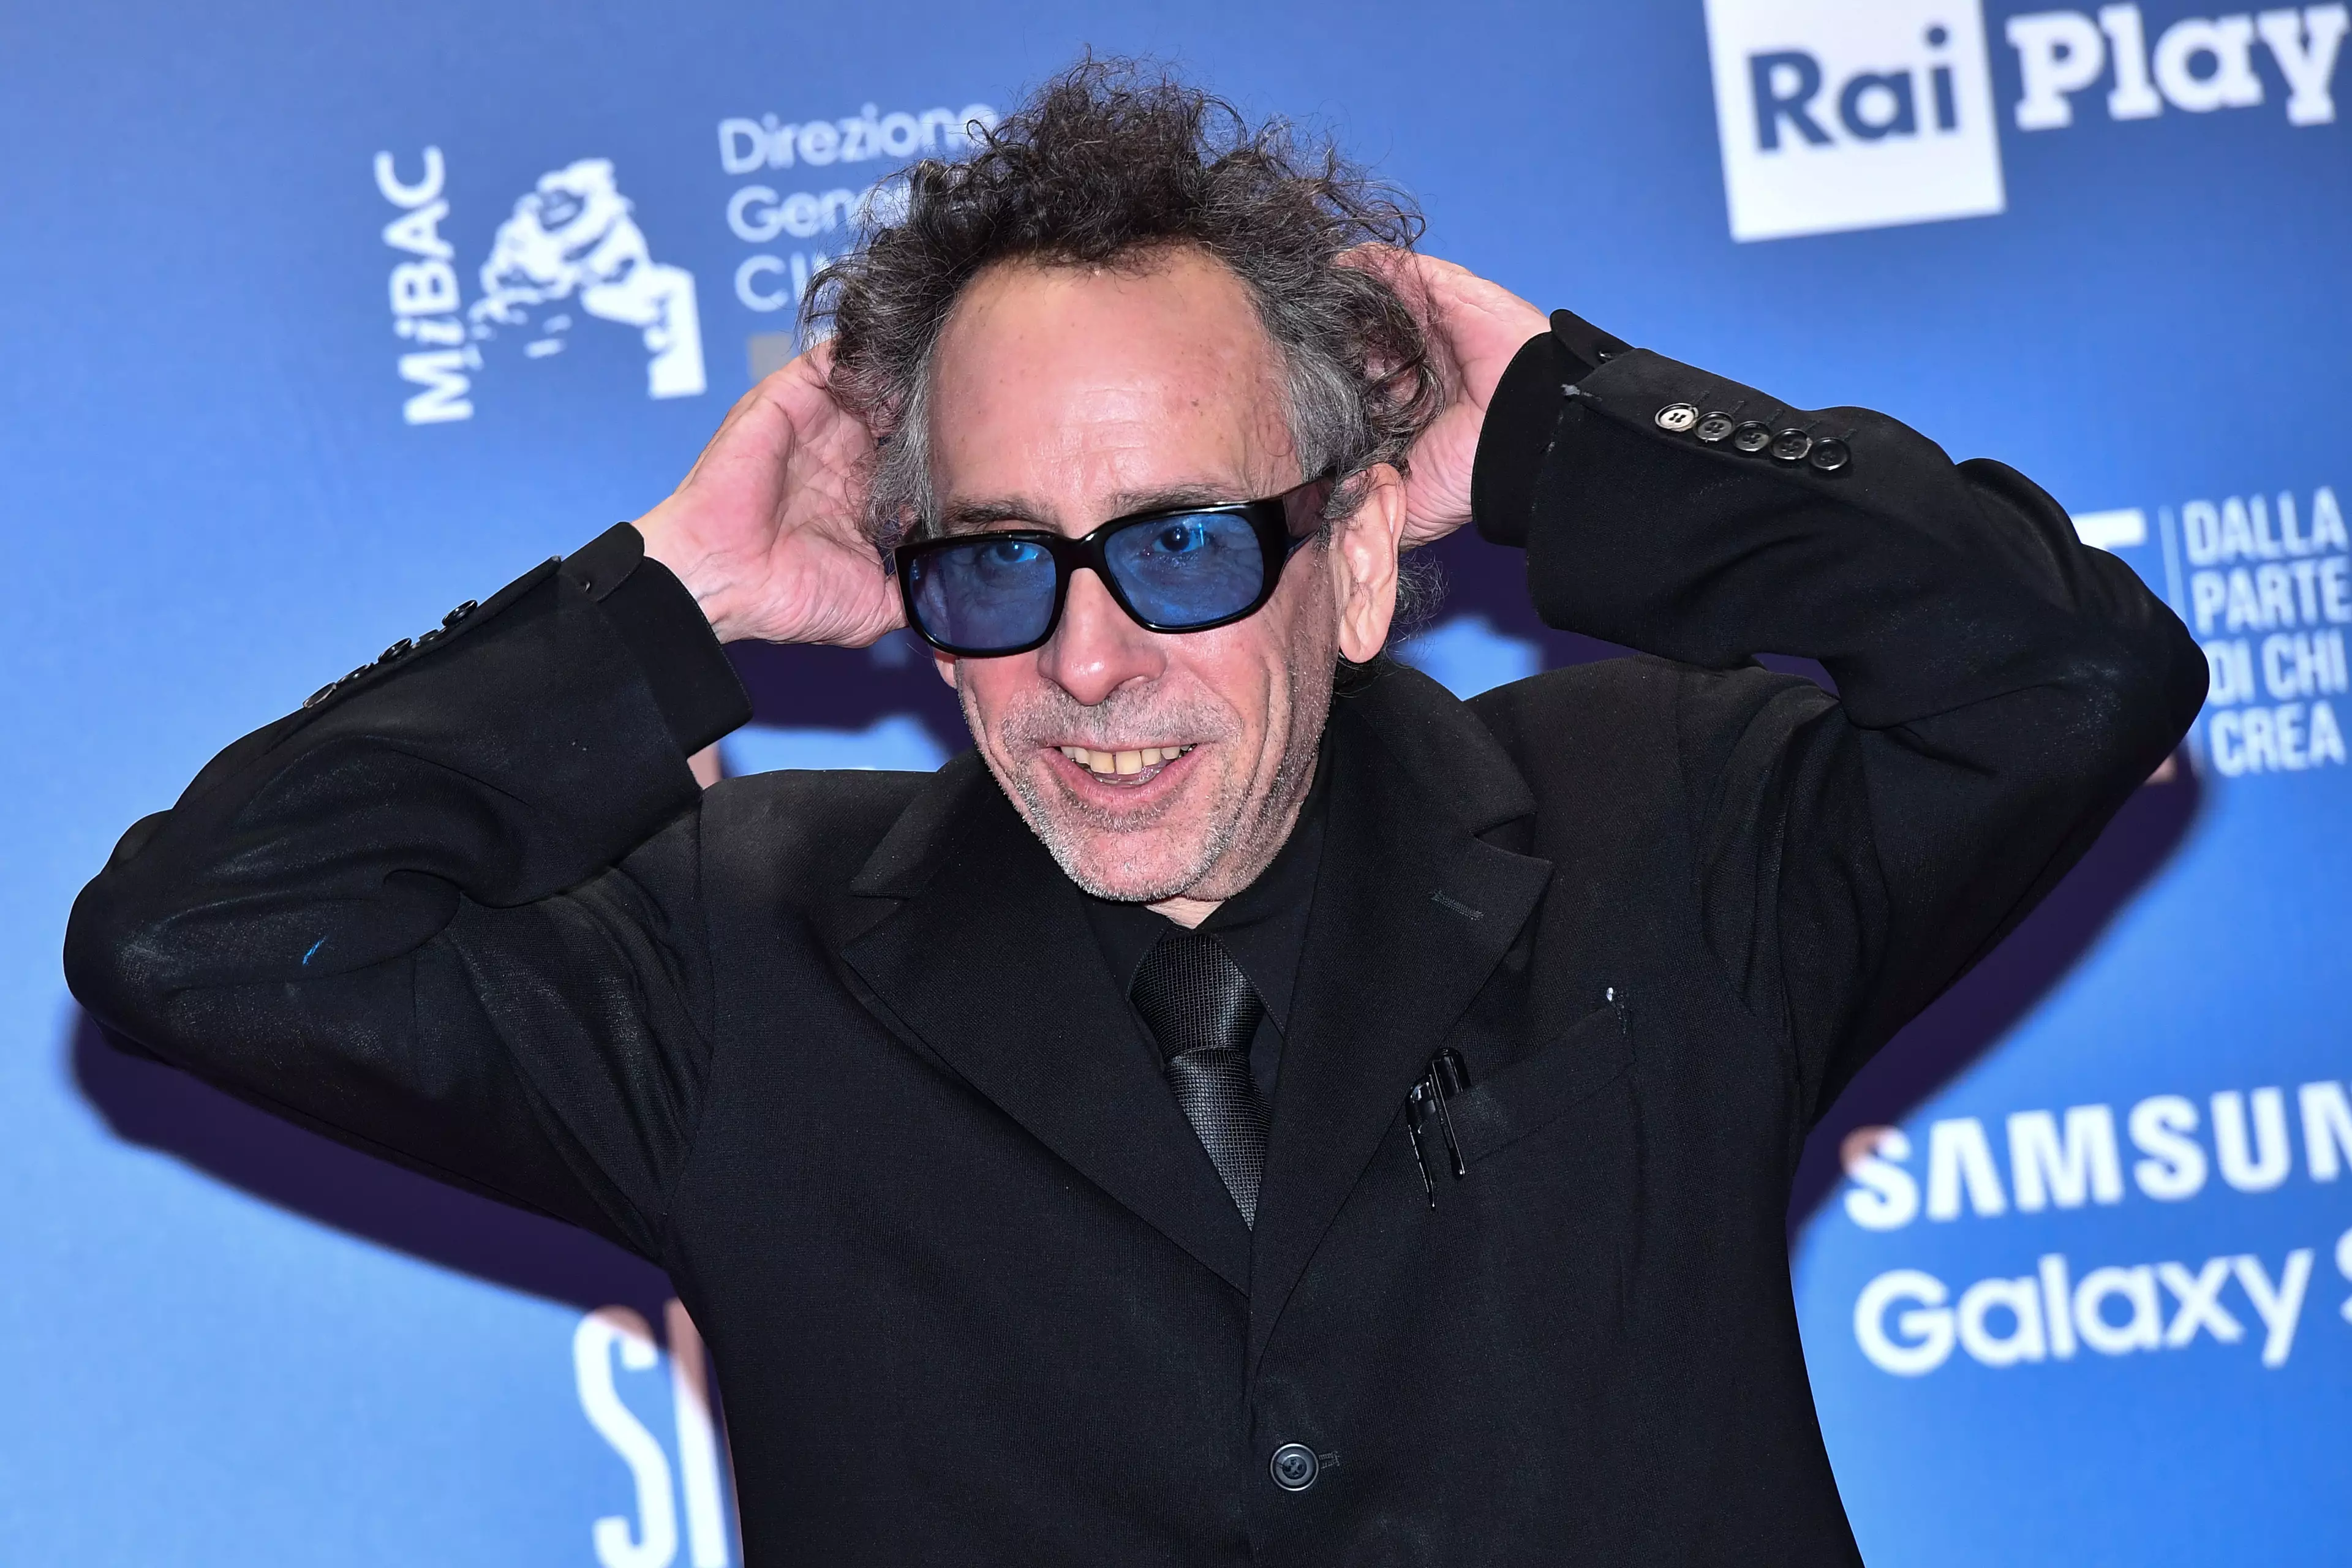 Tim Burton has also announced a new project with Netflix (